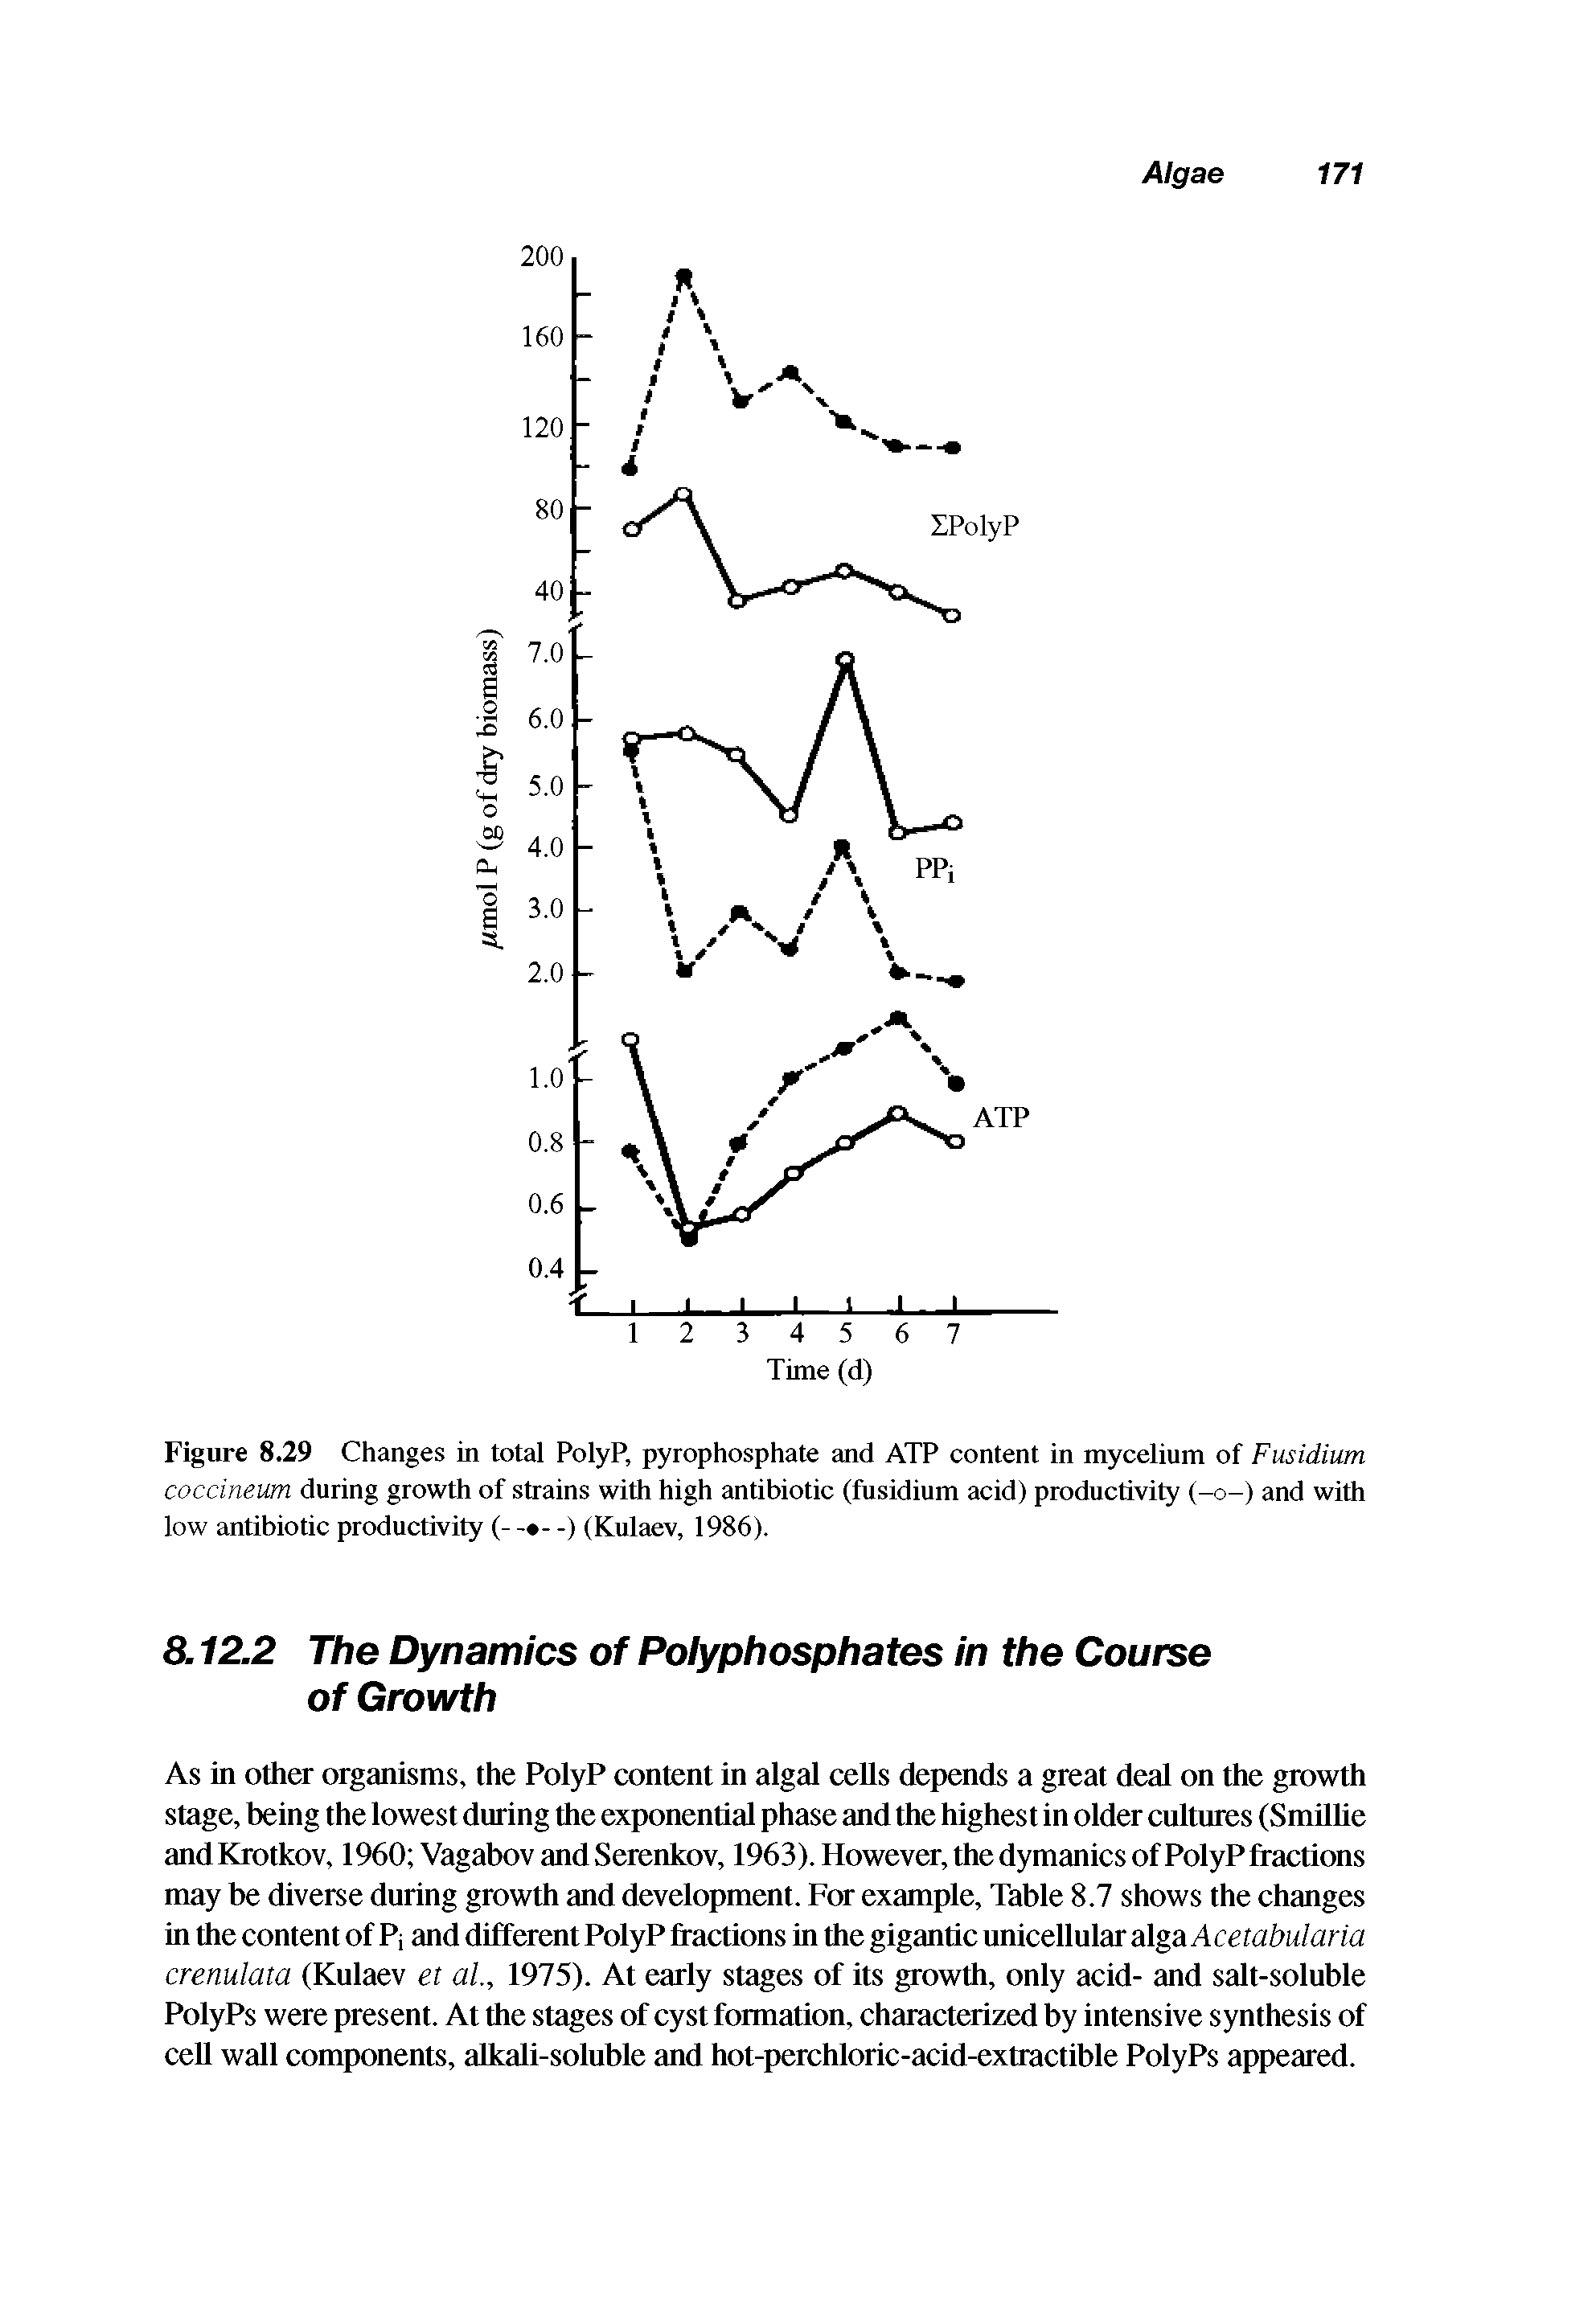 Figure 8.29 Changes in total PolyP, pyrophosphate and ATP content in mycelium of Fusidium coccineum during growth of strains with high antibiotic (fusidium acid) productivity (-o-) and with low antibiotic productivity (- -) (Kulaev, 1986).